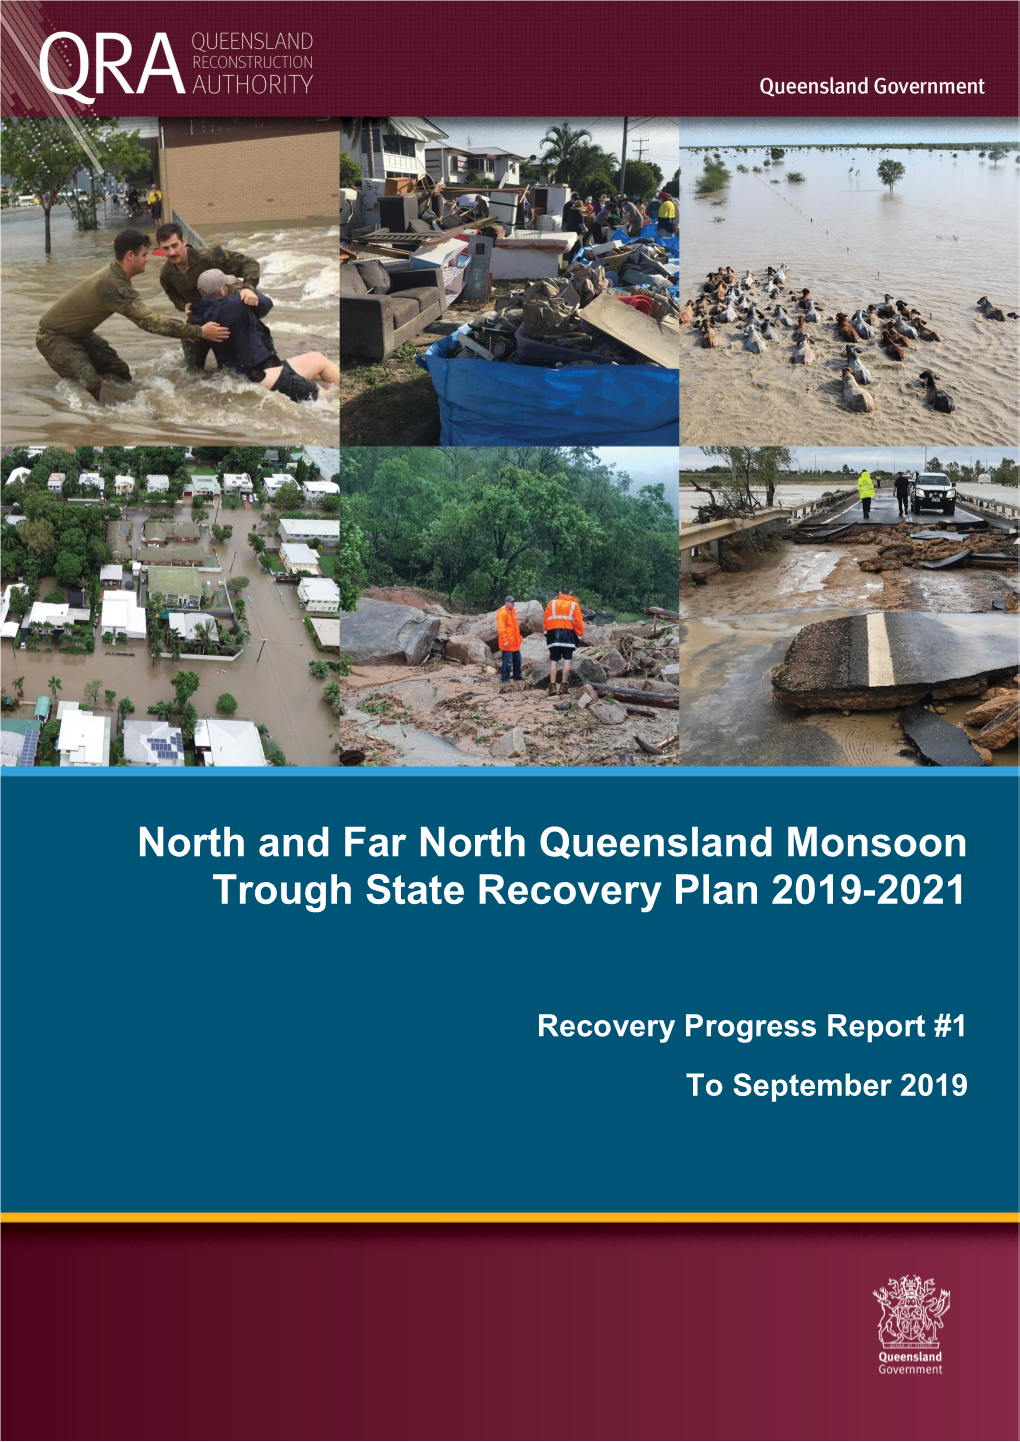 North and Far North Queensland Monsoon Trough State Recovery Plan 2019-2021